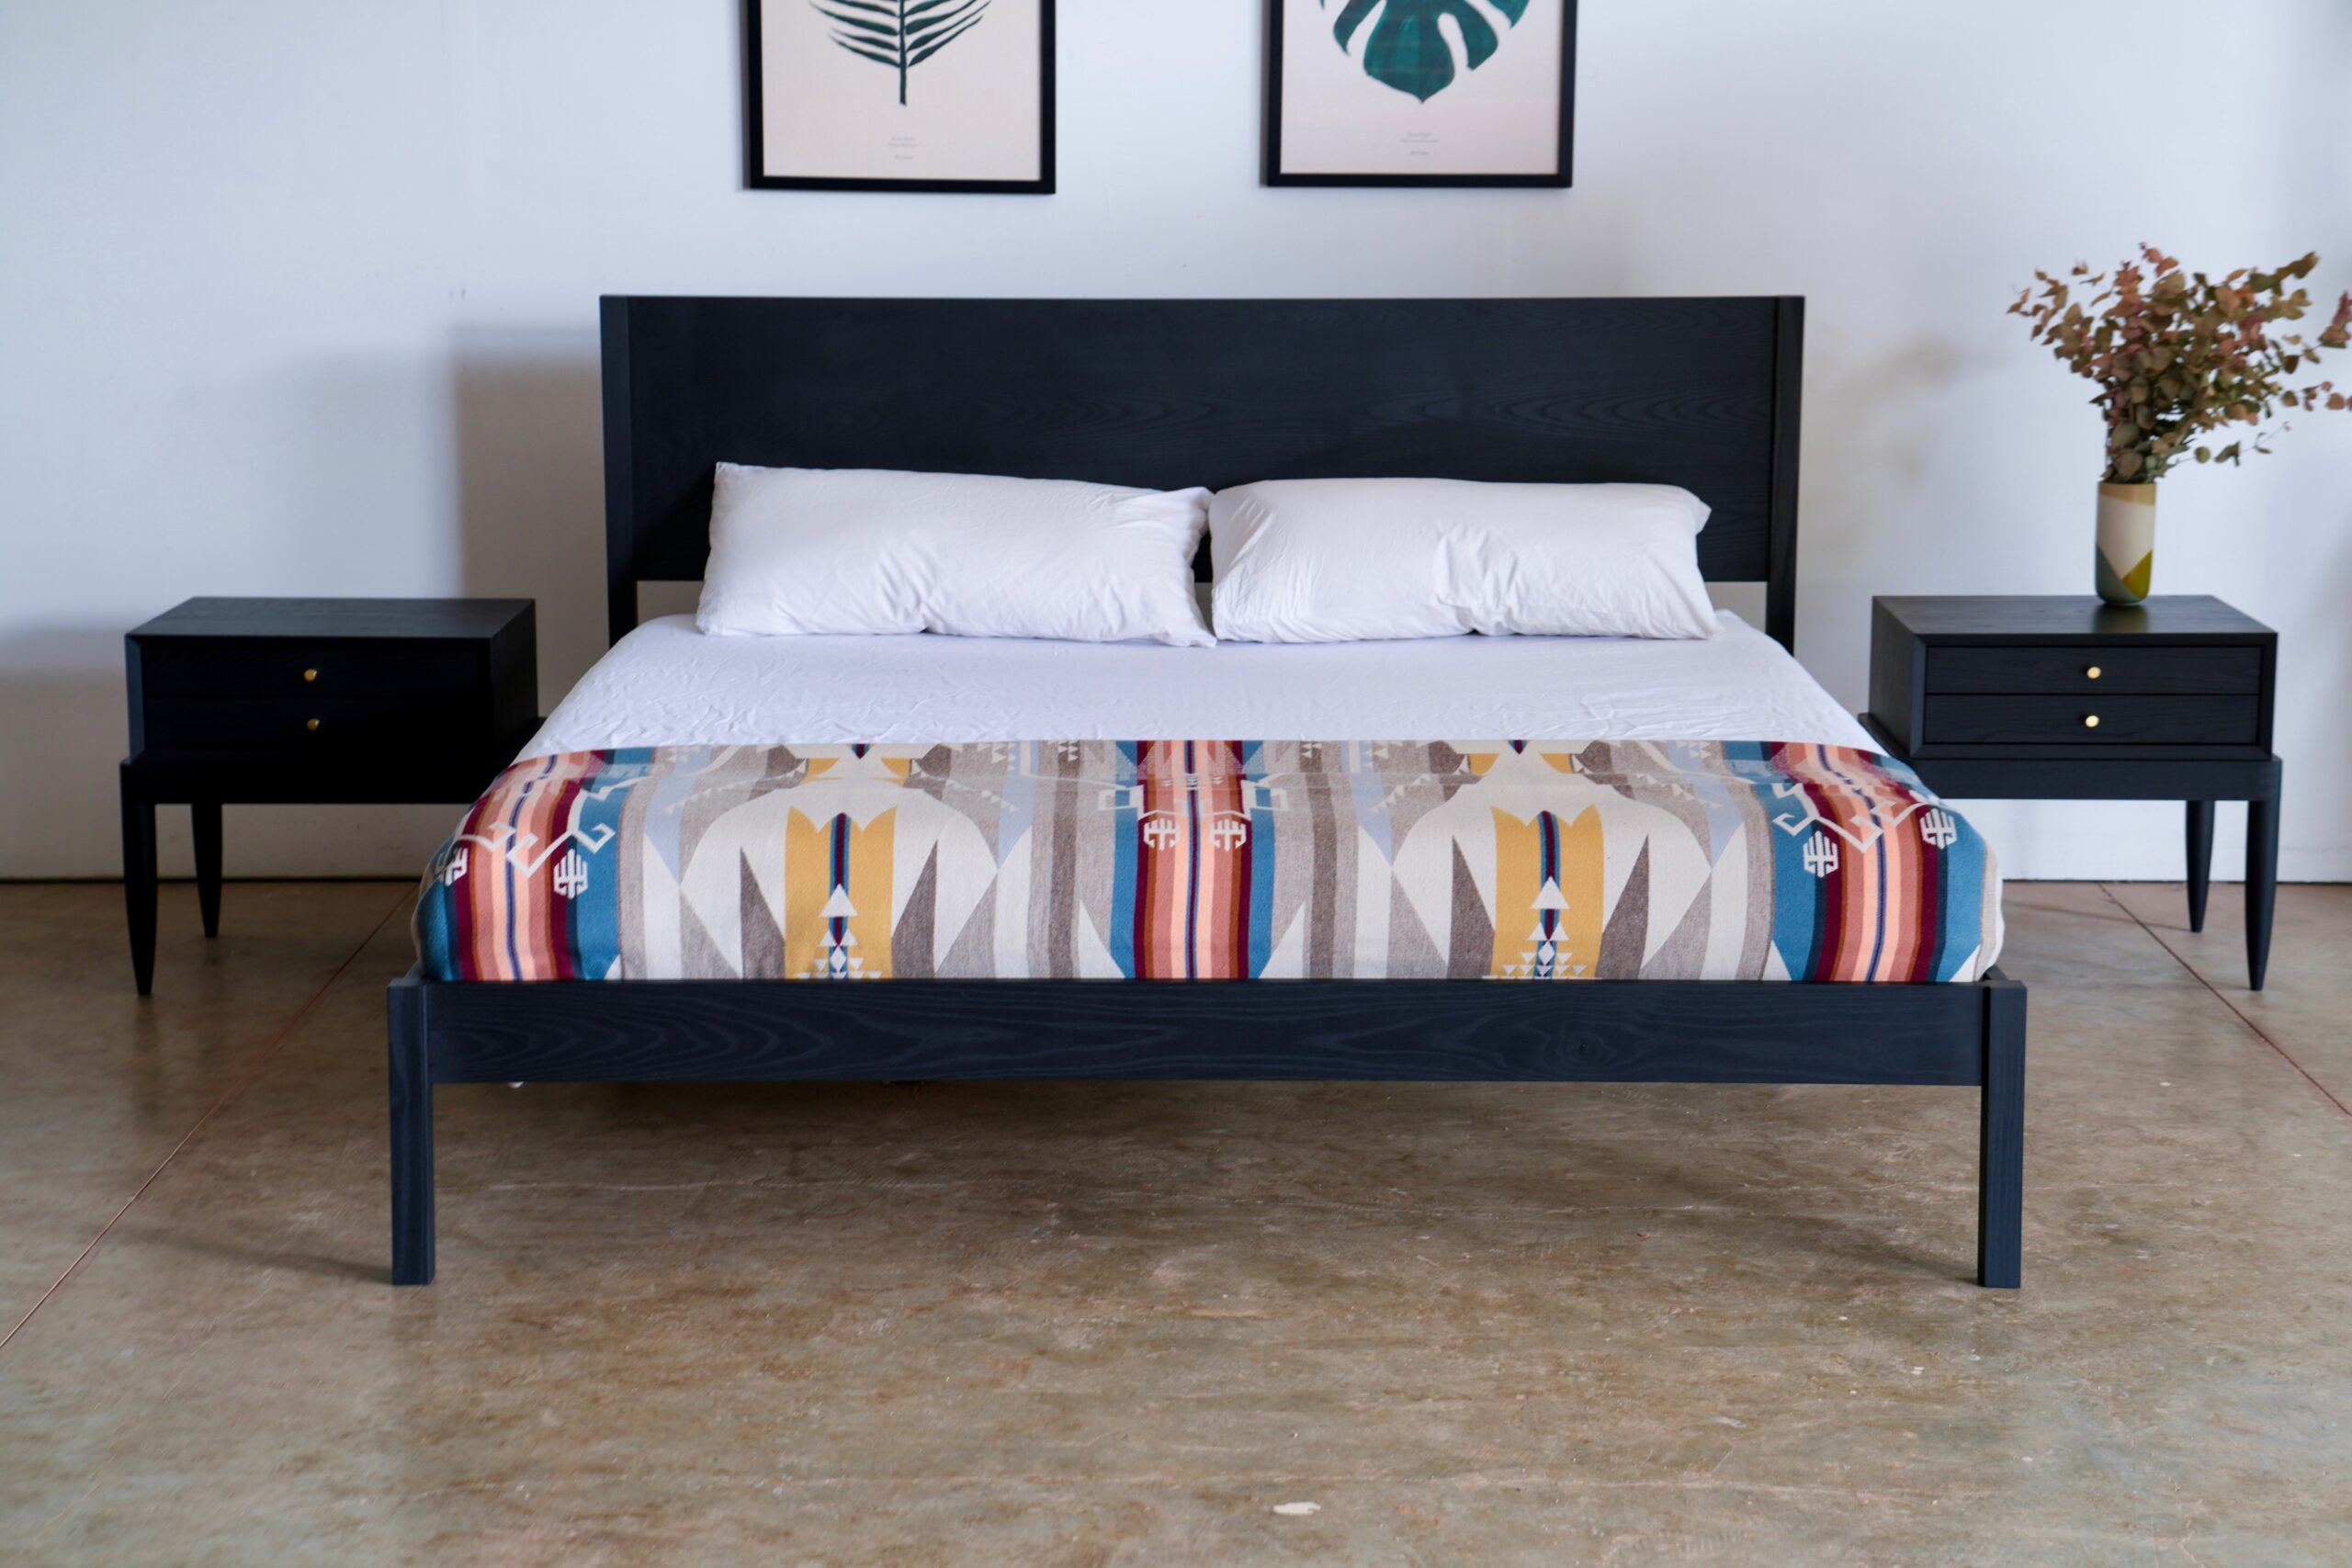 A simple platform bed made of ebonite ash, with a mattress and pillows and nightstands.